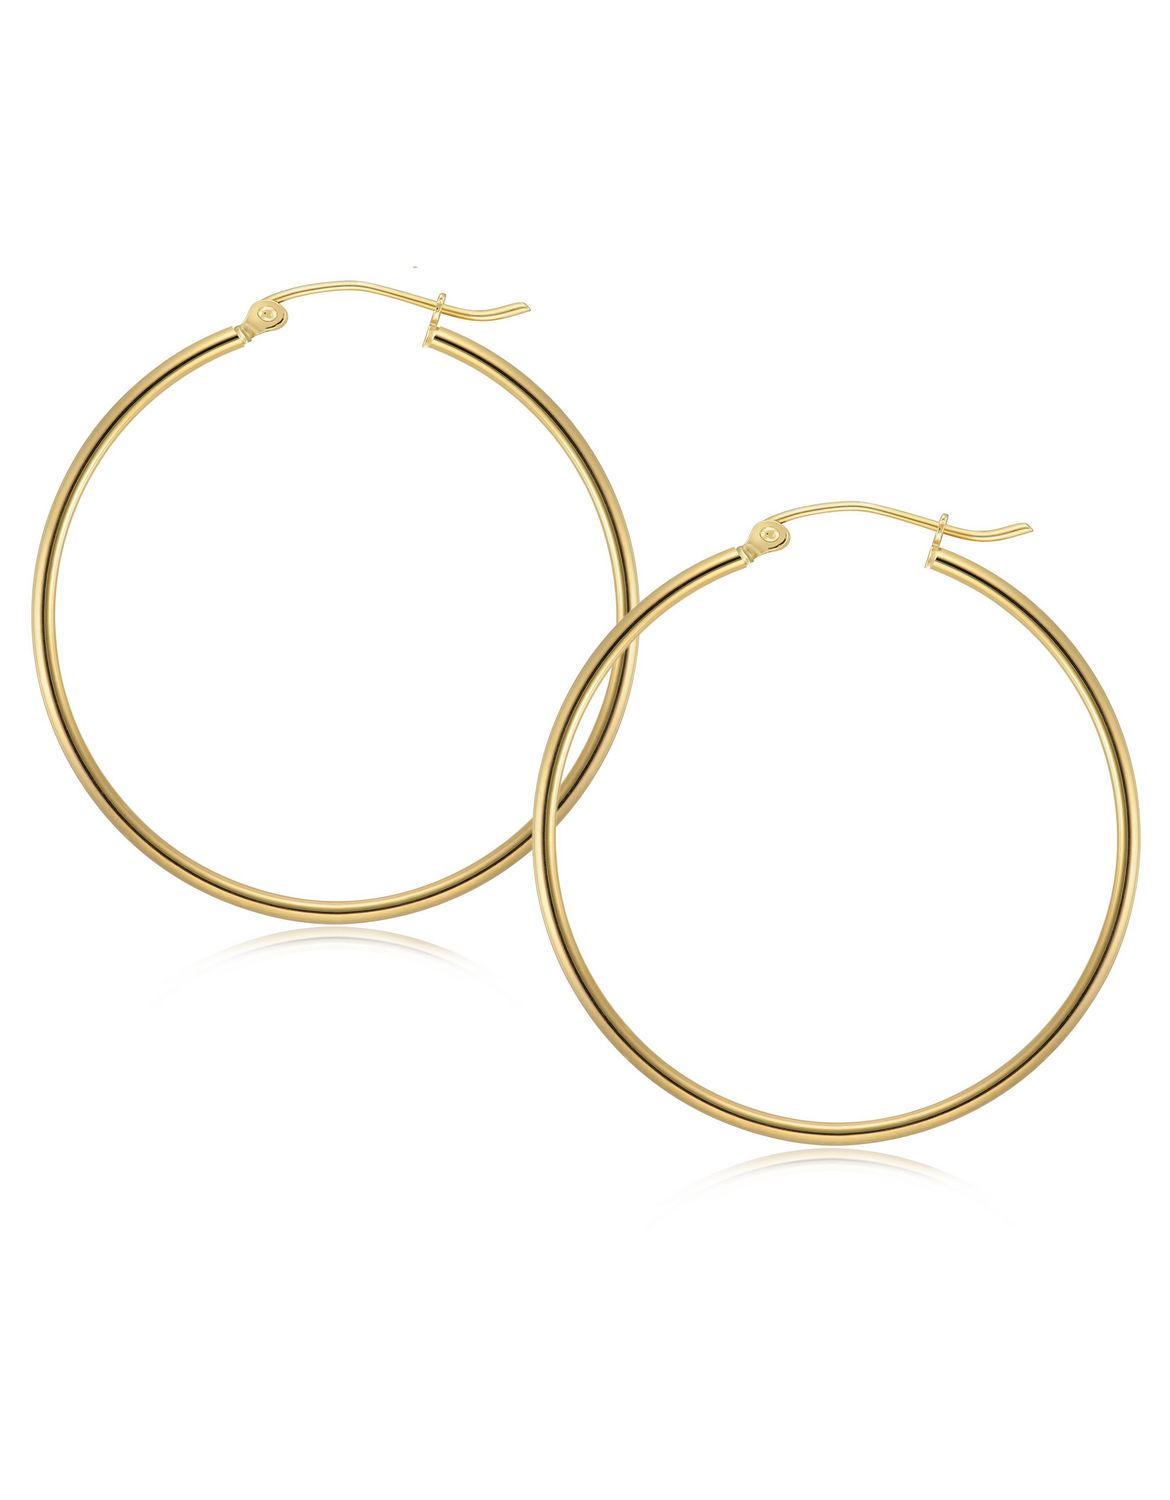 Quintessential10k Gold Large Round Yellow Hoop Earrings | Walmart Canada